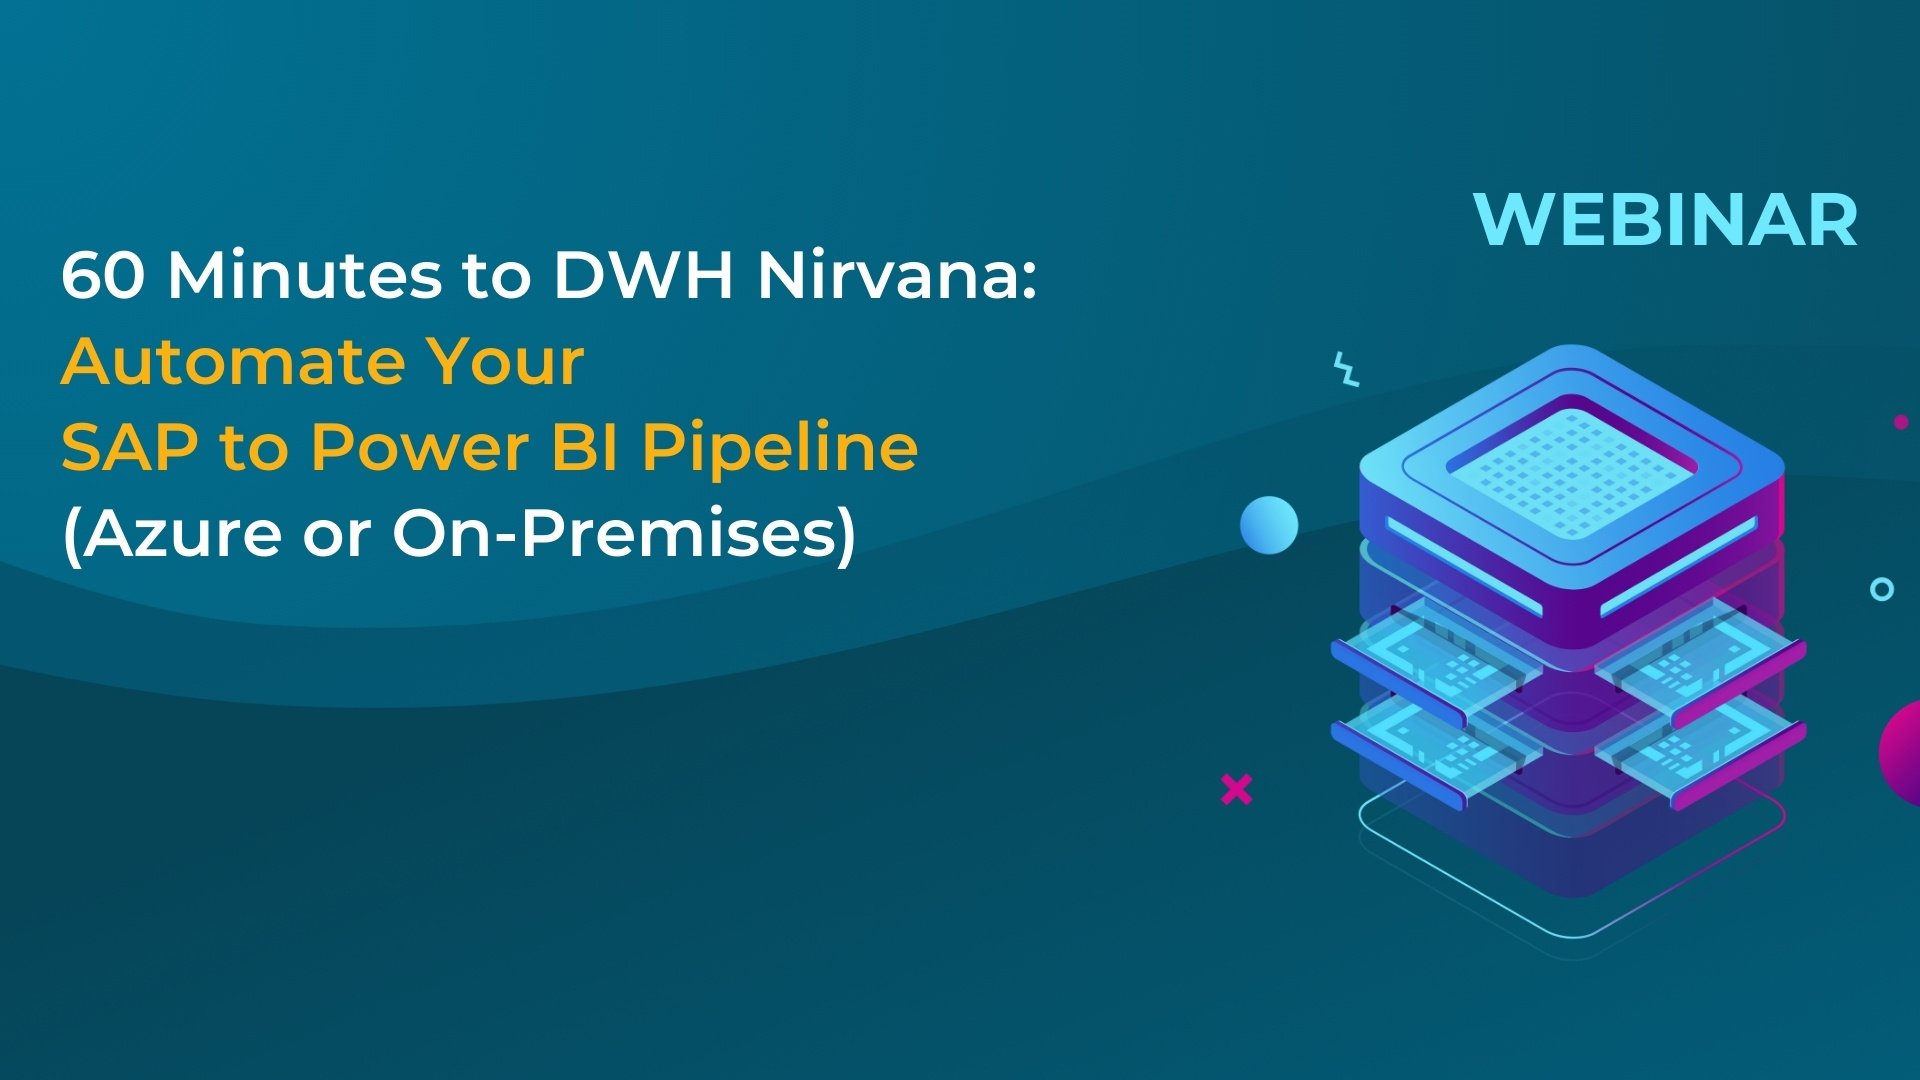 60 Minutes to DWH Nirvana: Automate Your SAP to Power BI Pipeline (Azure or On-Premises)